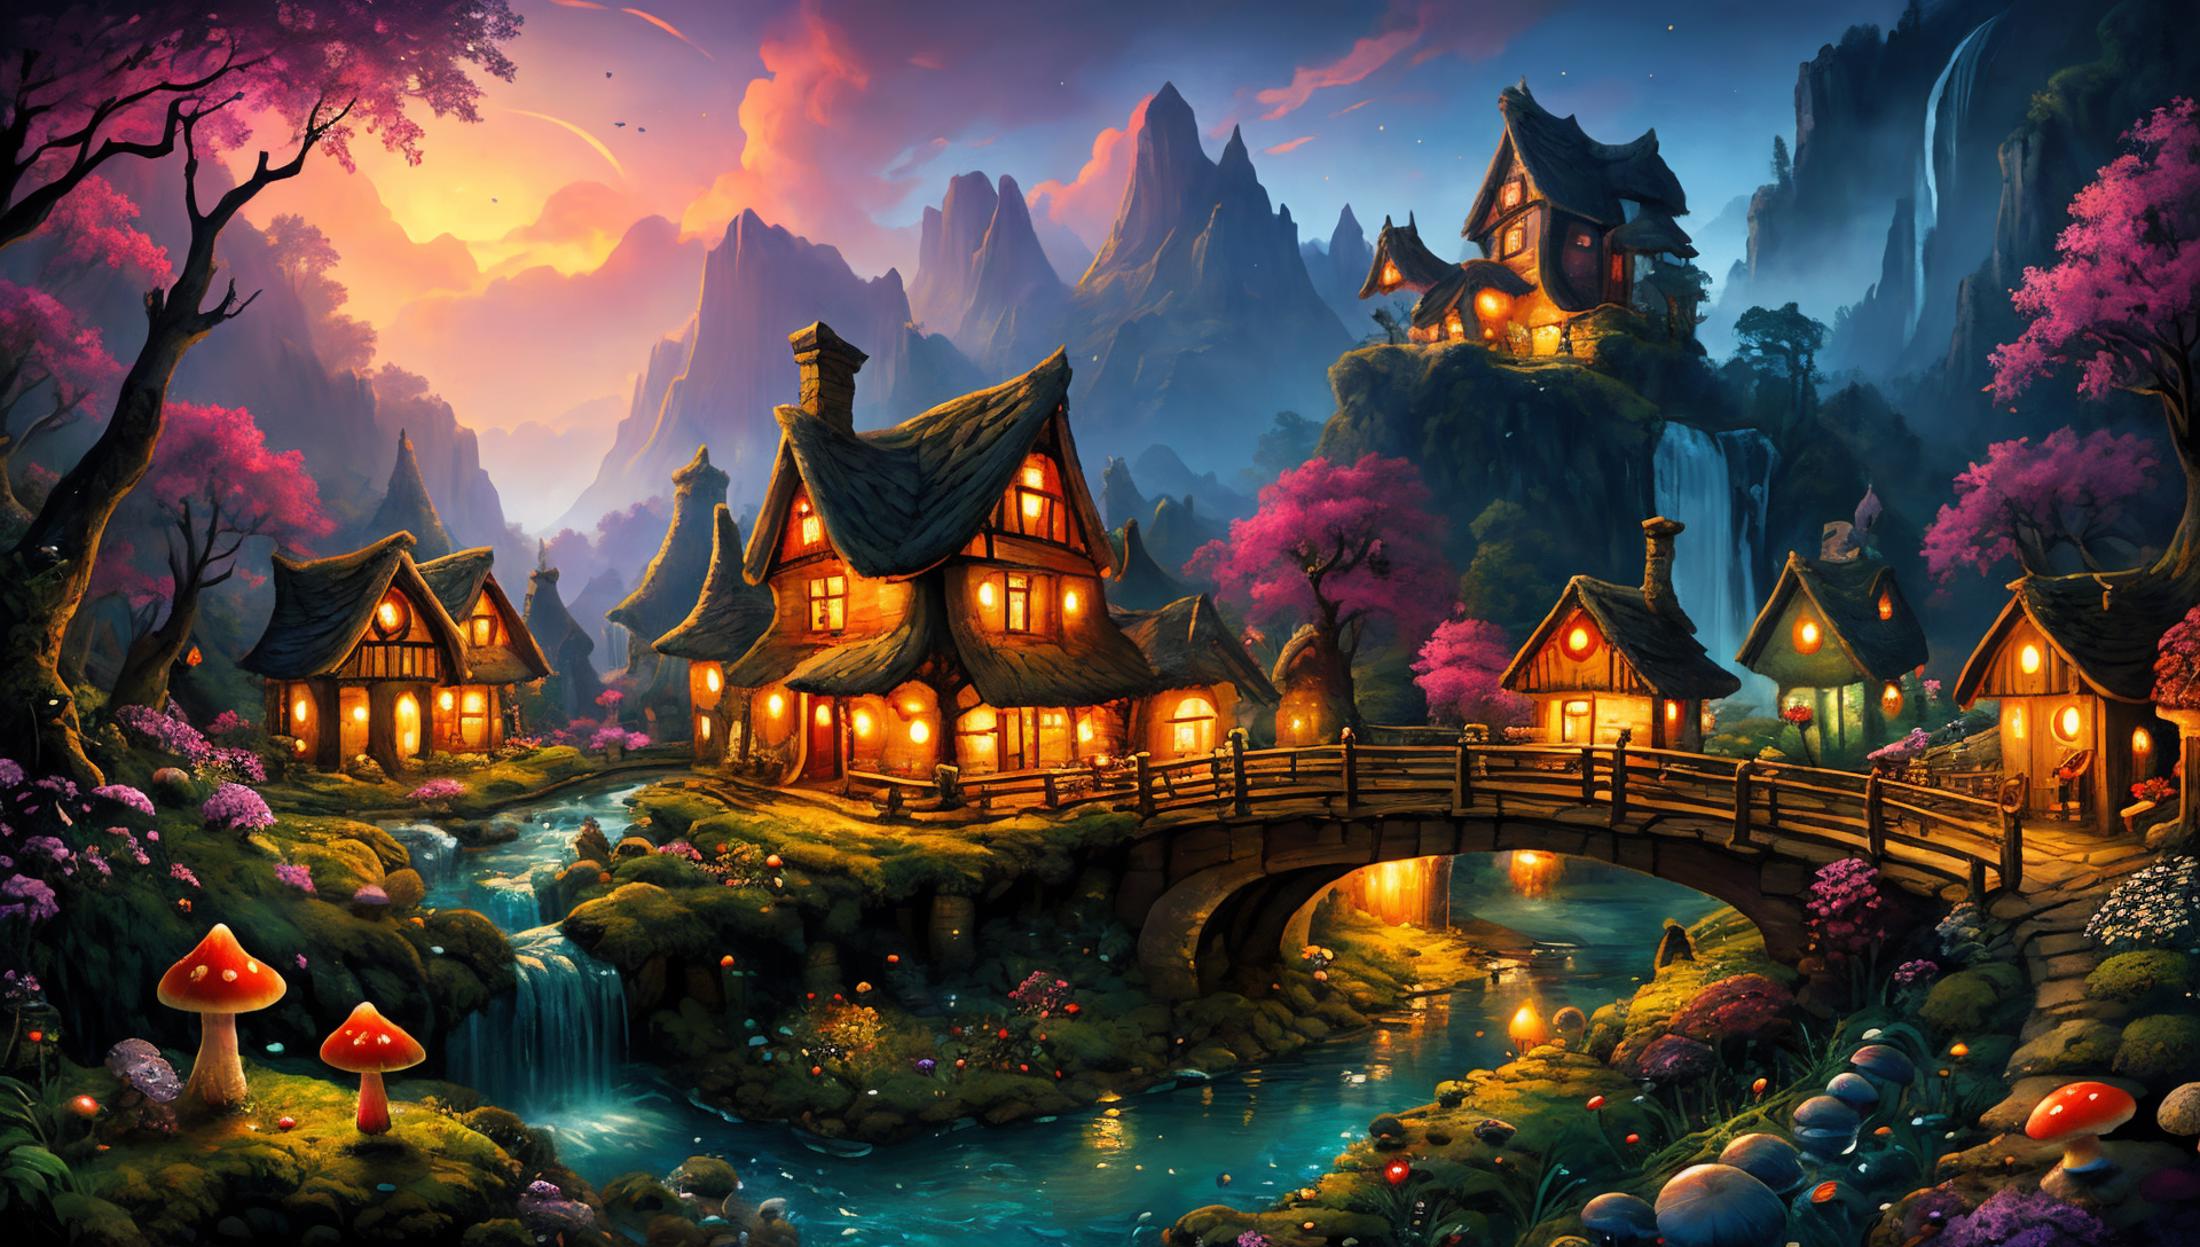 Magical Forest Home image by Inland389